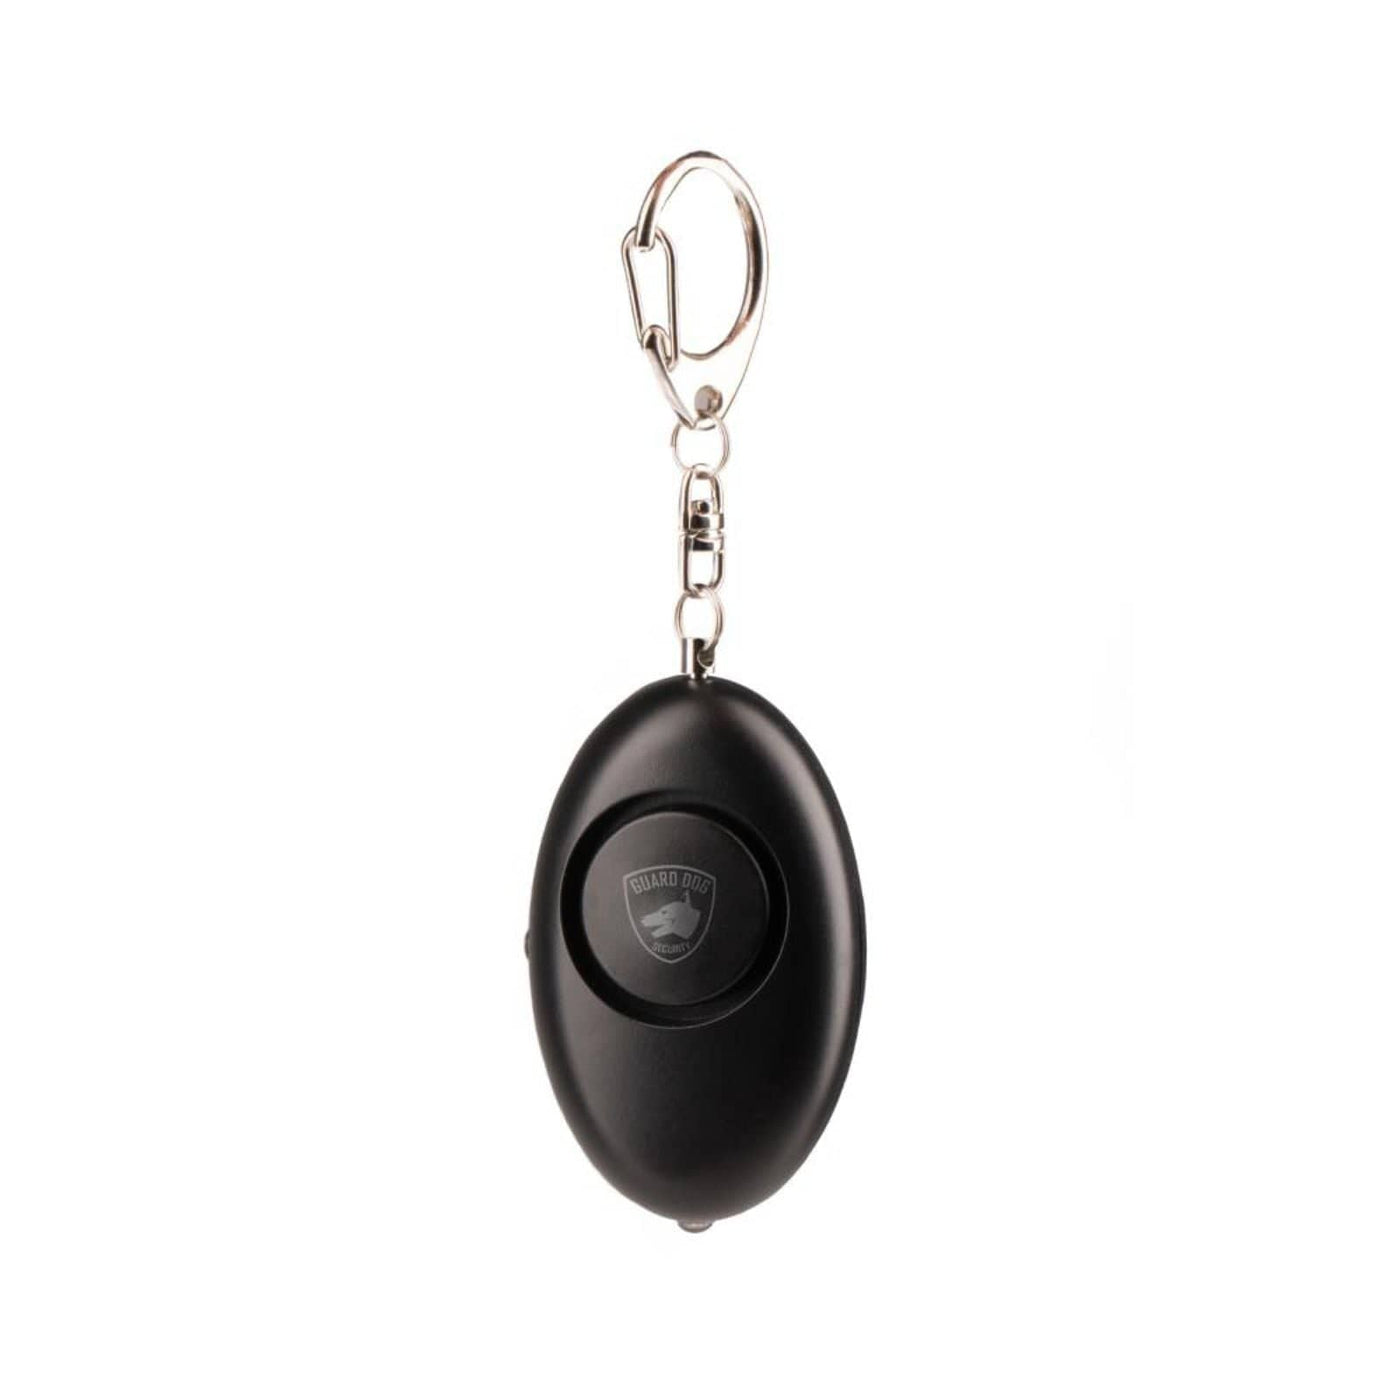 Guard Dog Security Guard Dog Security Keychain Alarm Black Public Safety And Le